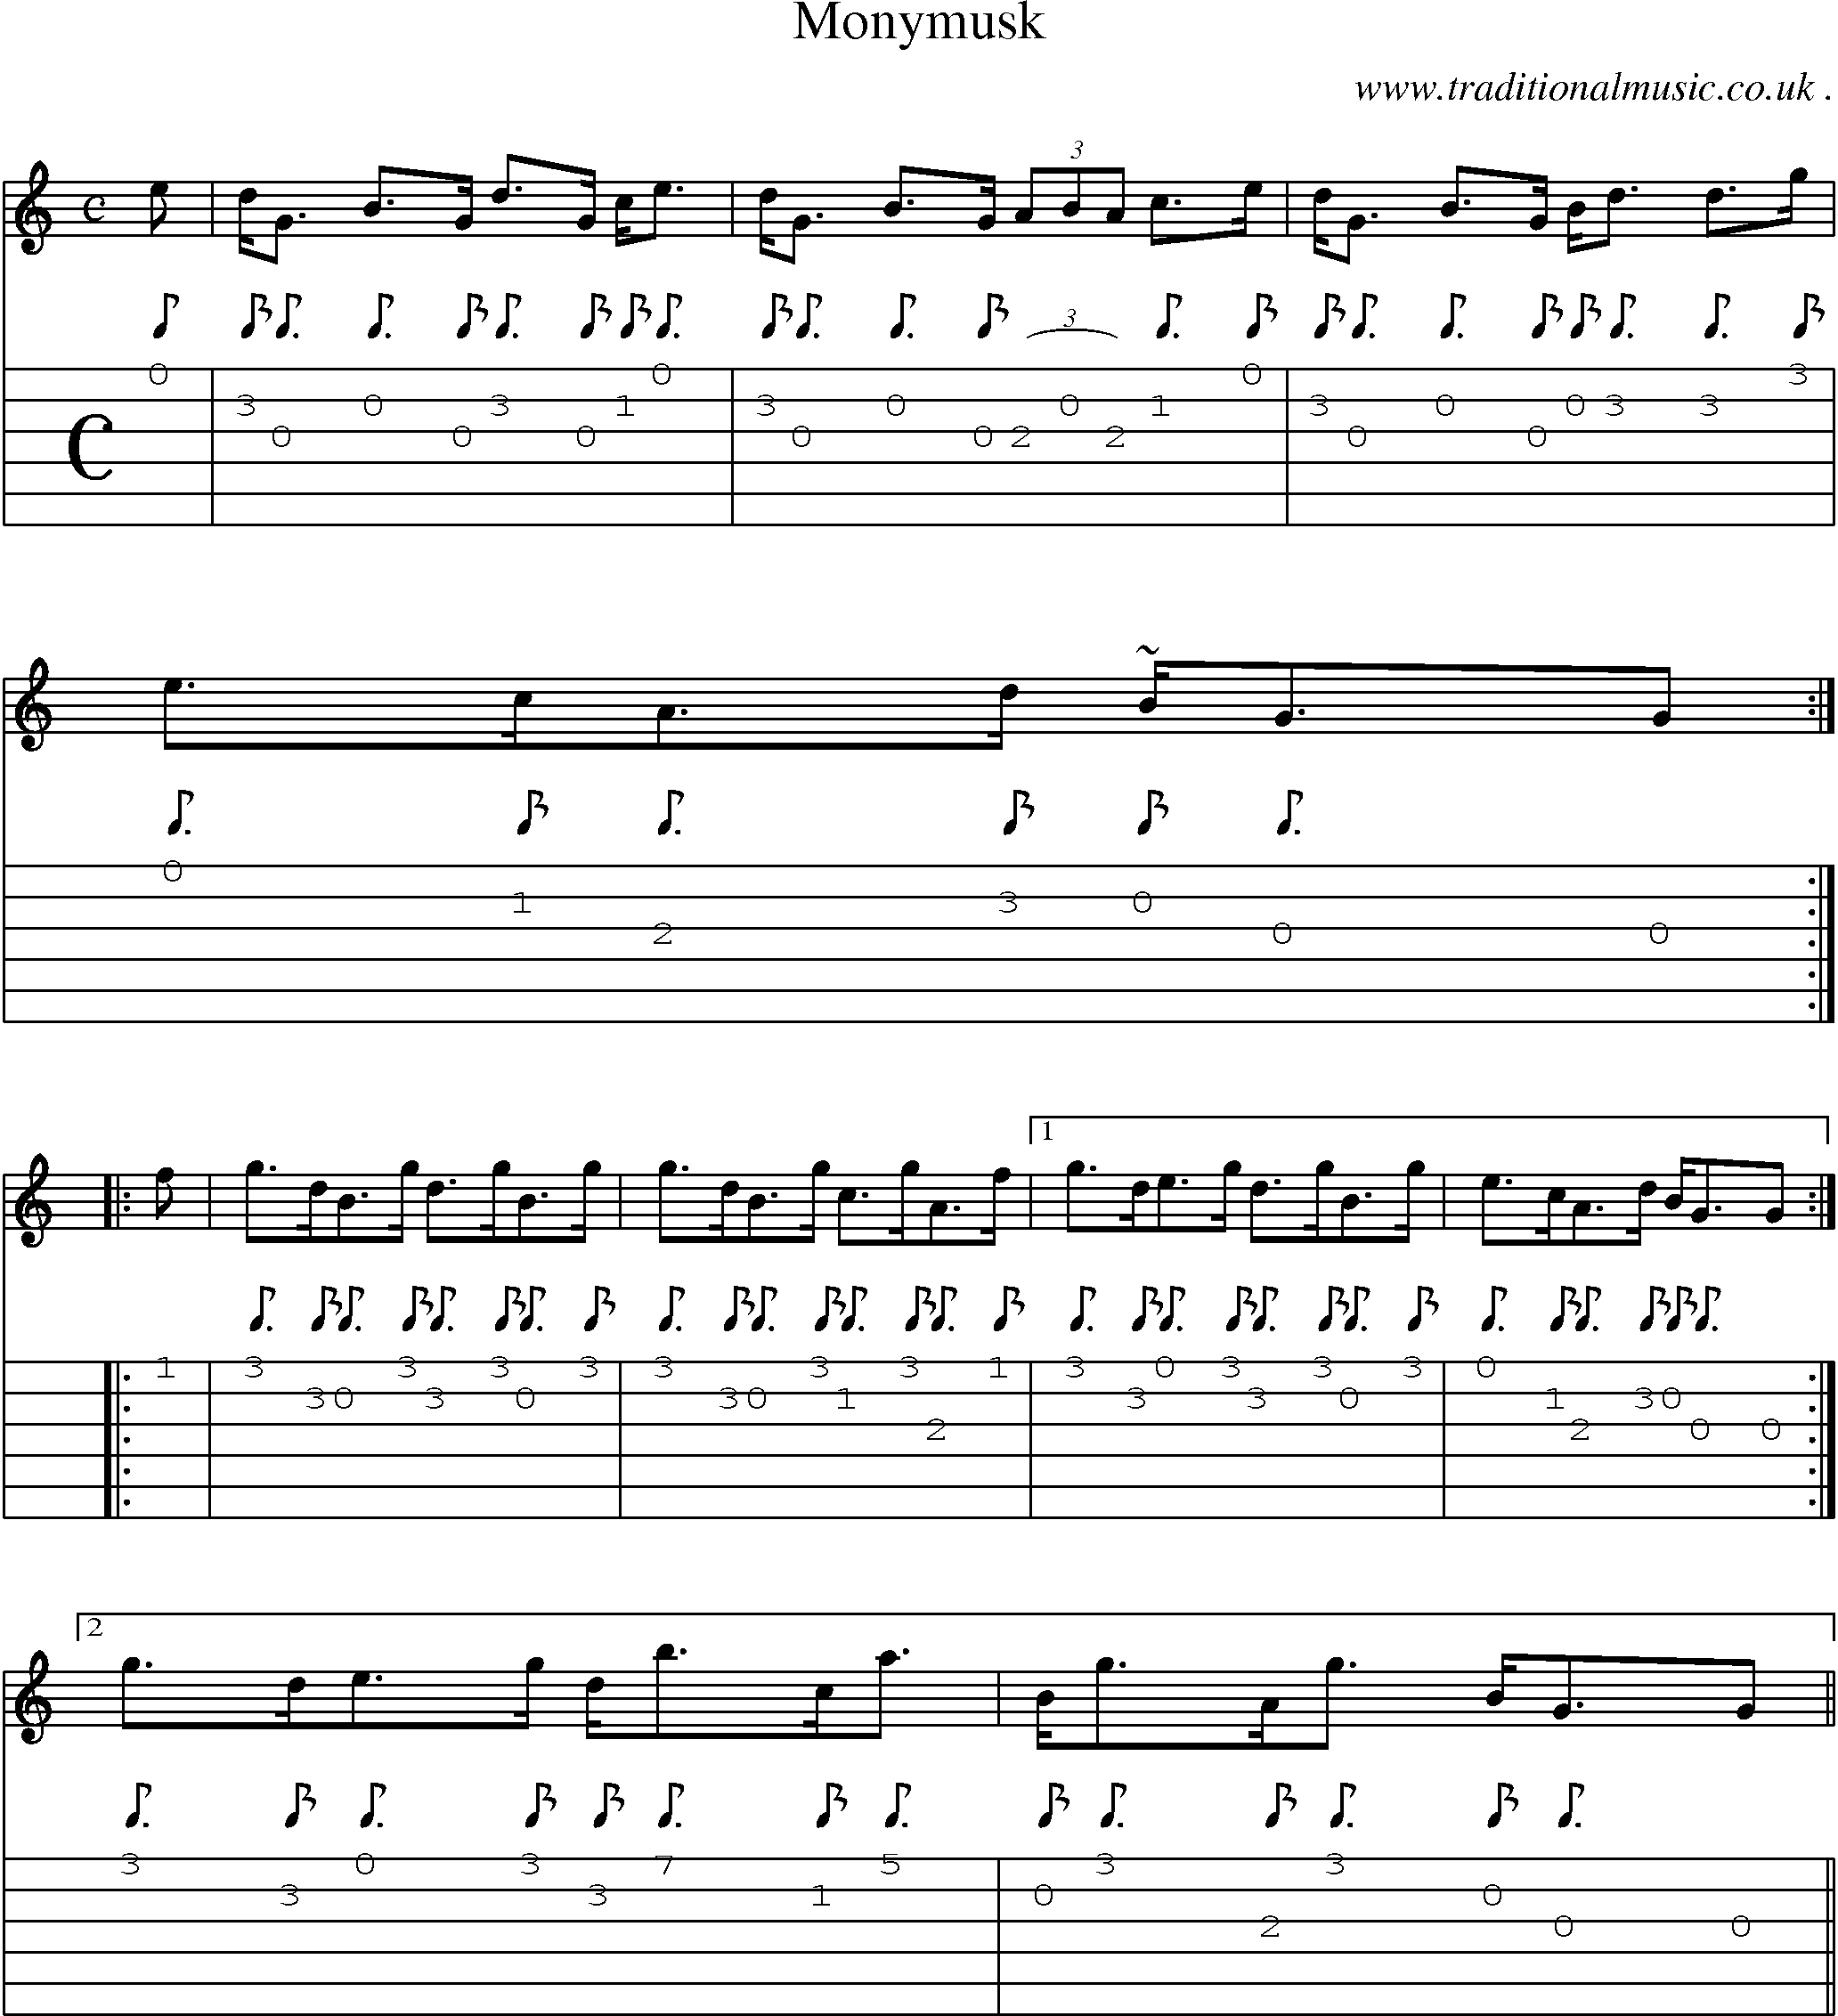 Sheet-music  score, Chords and Guitar Tabs for Monymusk